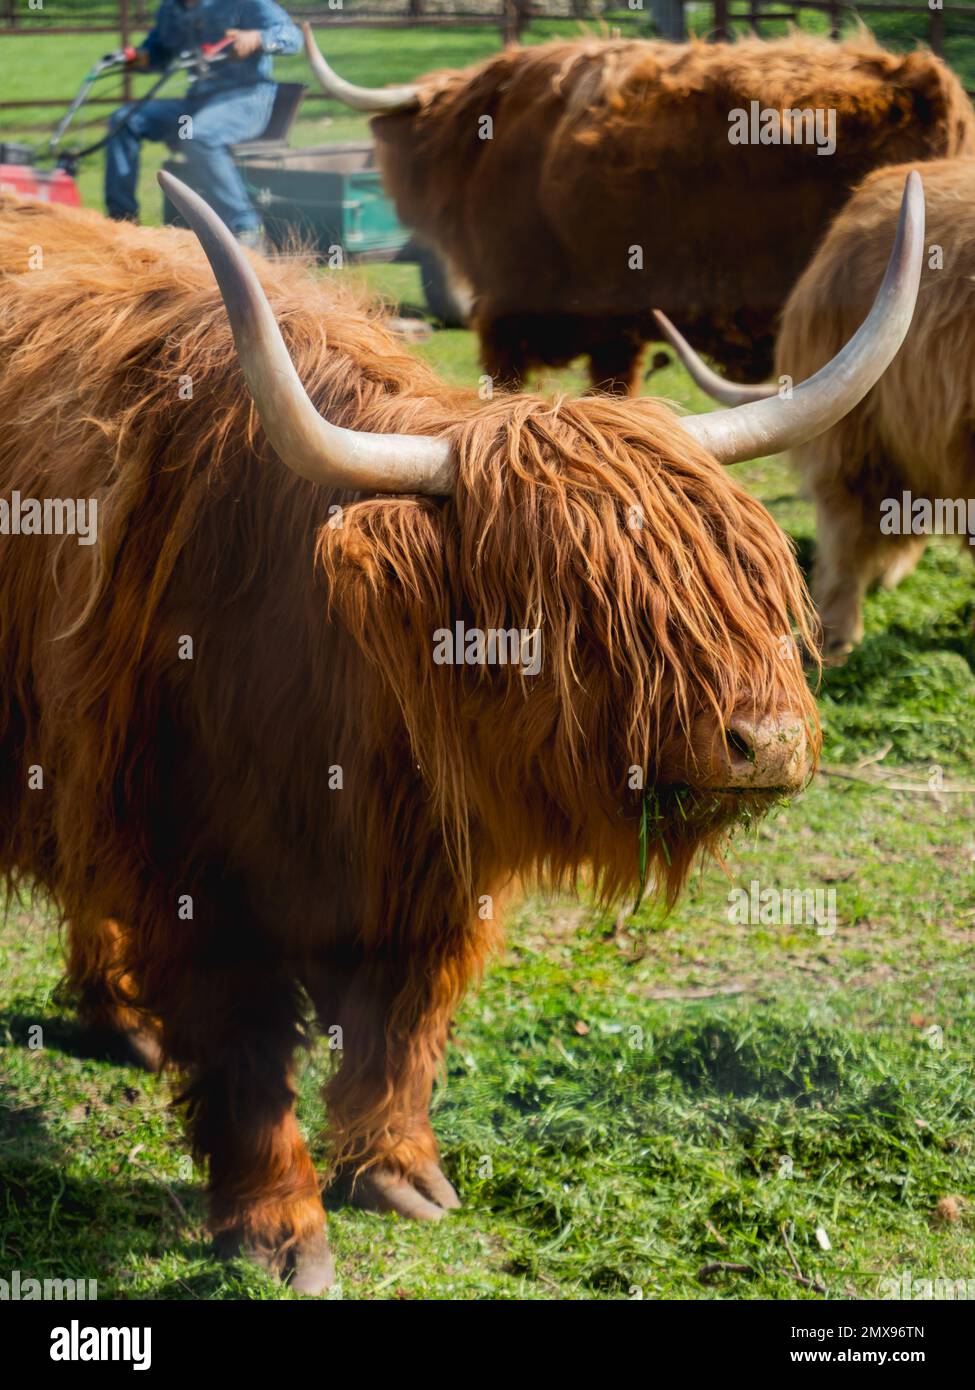 Highland Scottish breed of rustic cattle. Furry cows eat fresh grass in paddock. Stock Photo